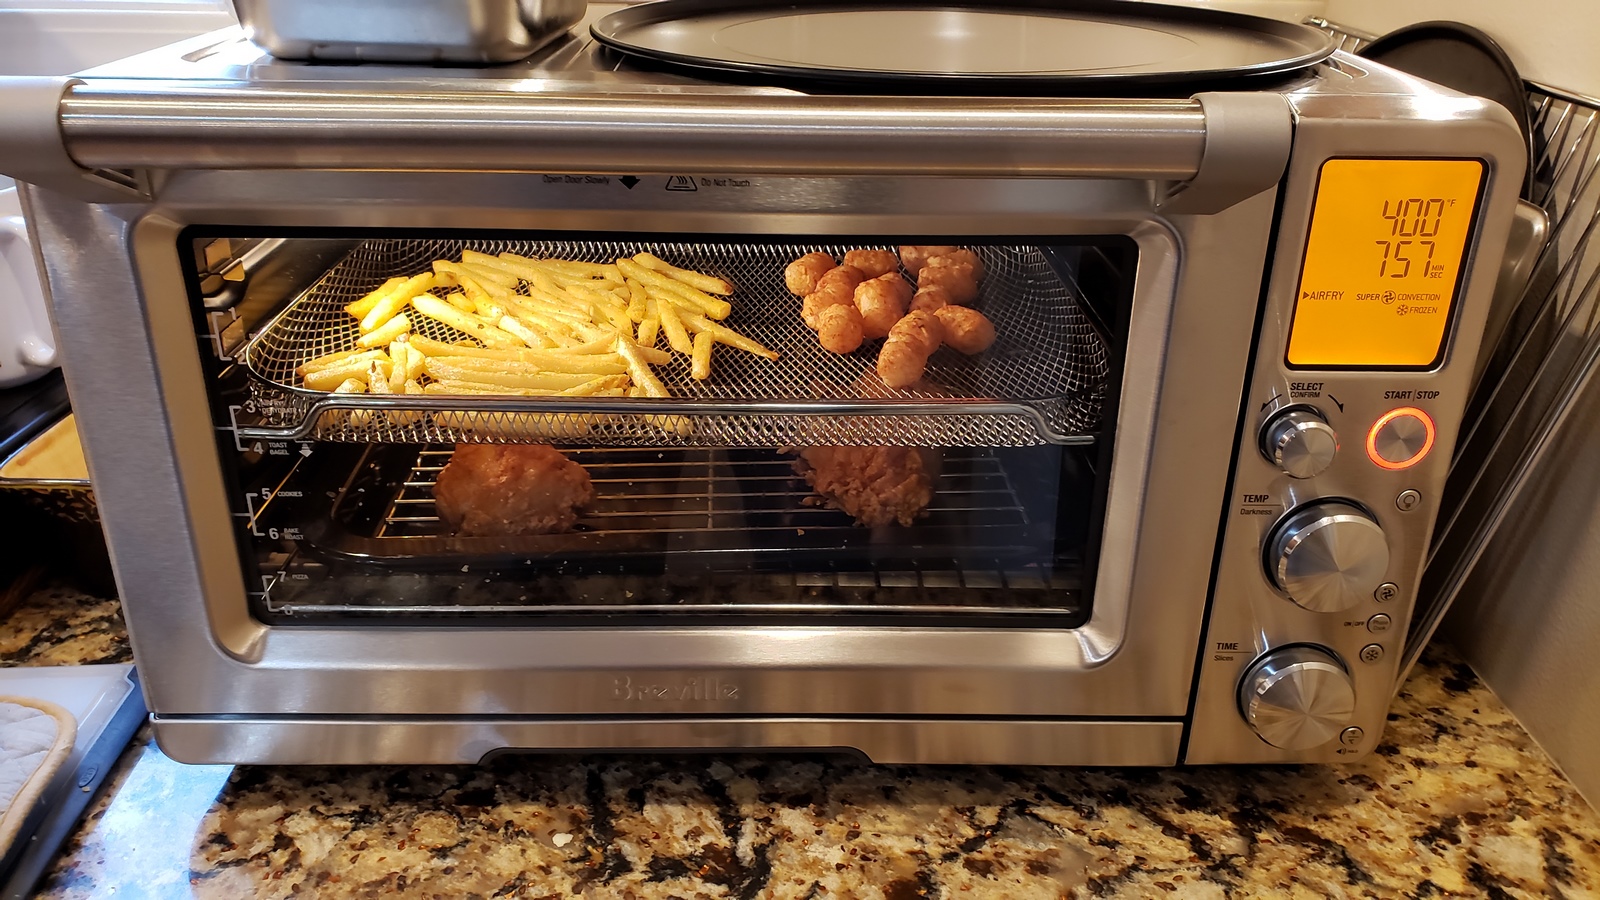 How To Cook Fries In A Toaster Oven